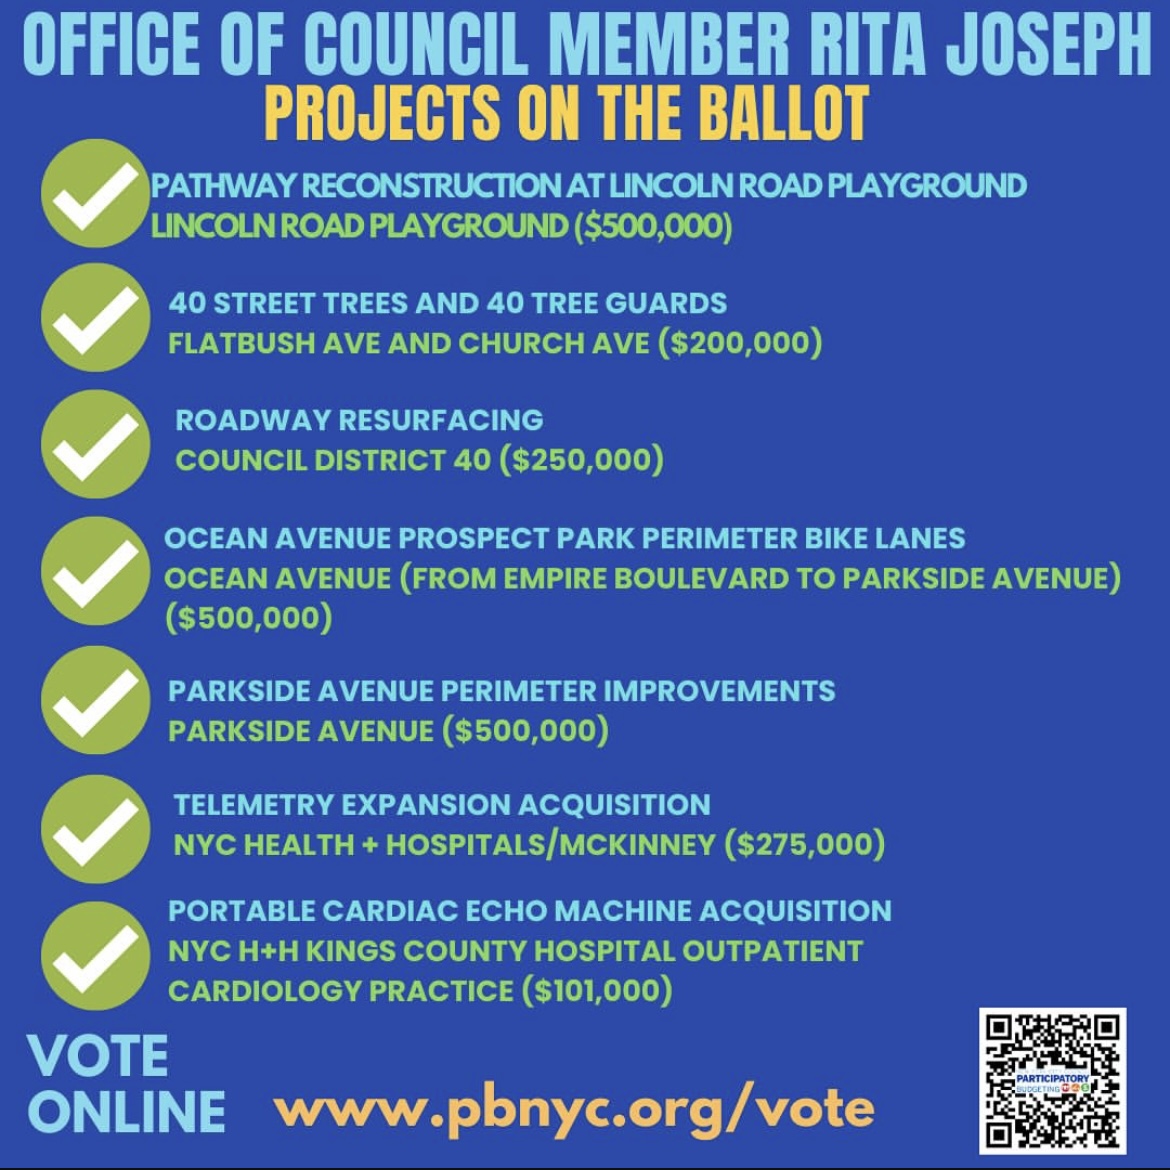 Participatory Budgeting voting week is happening now through Sunday, April 14, in which residents throughout District 39 + District 40 cast ballots + vote for projects proposed by your neighbors that will improve our community + Prospect Park! More: pbnyc.org/vote